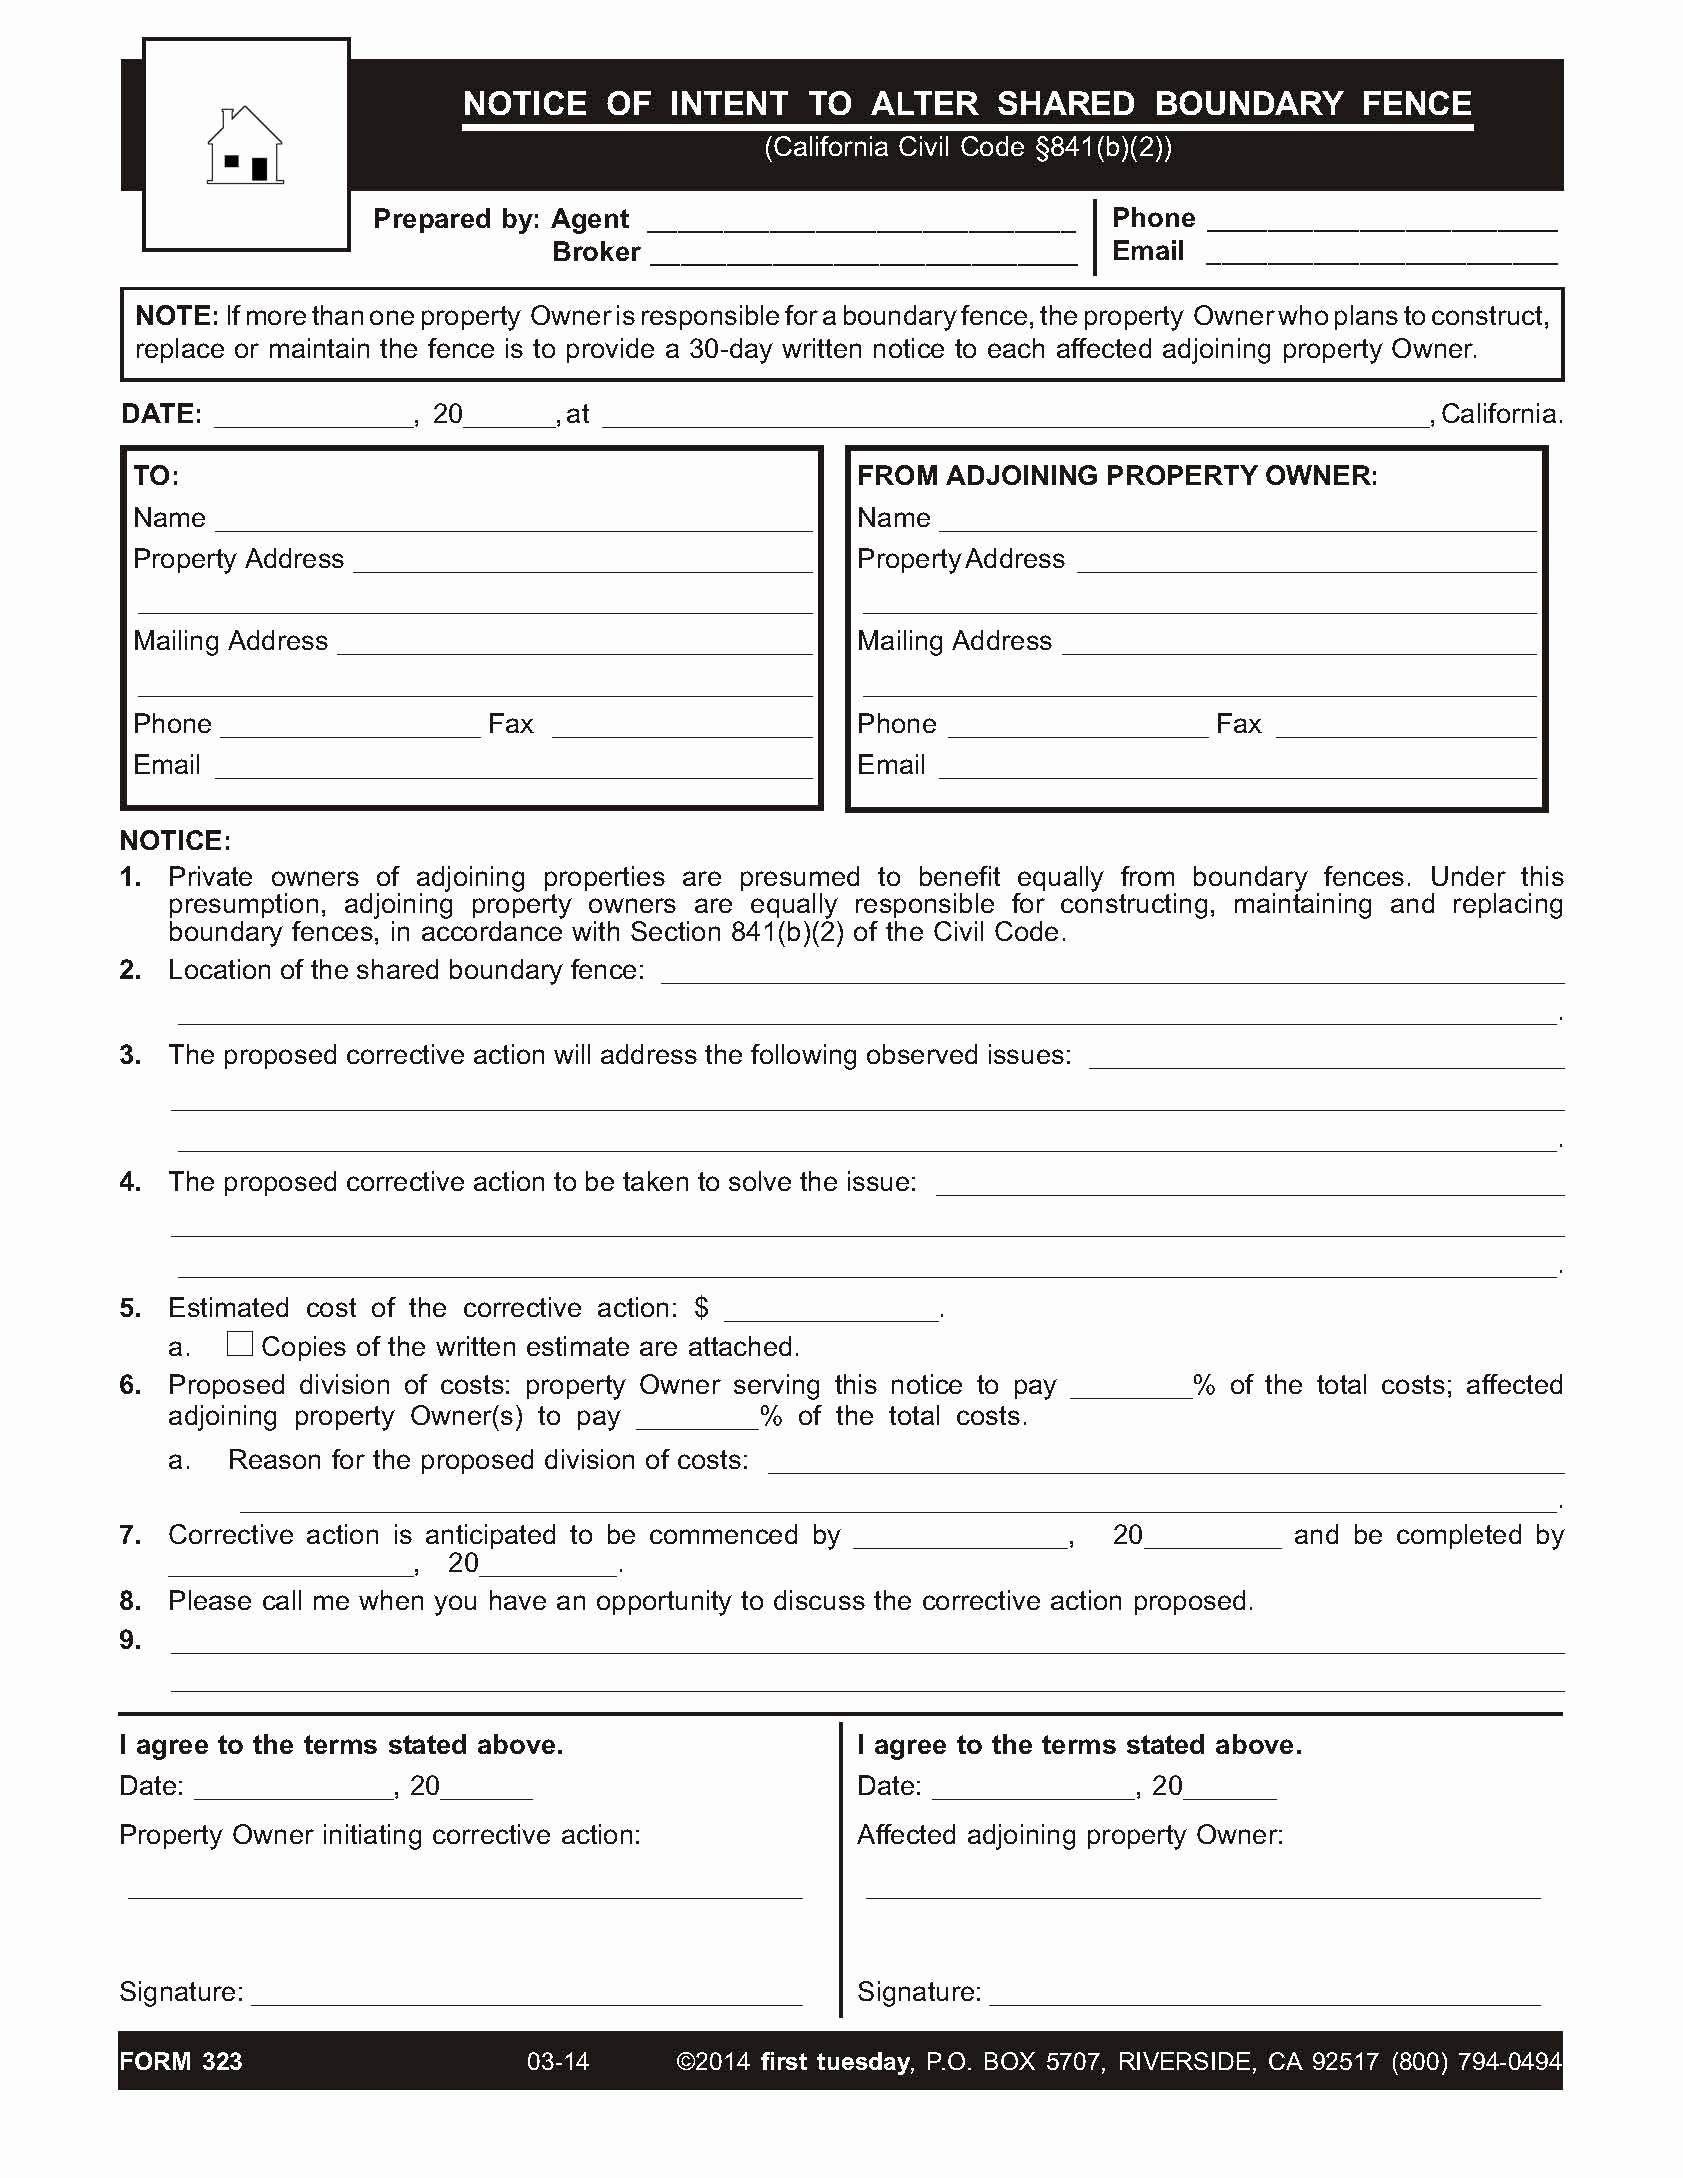 Fence Agreement Template Fresh Mon Boundary Fences An Owner S 30